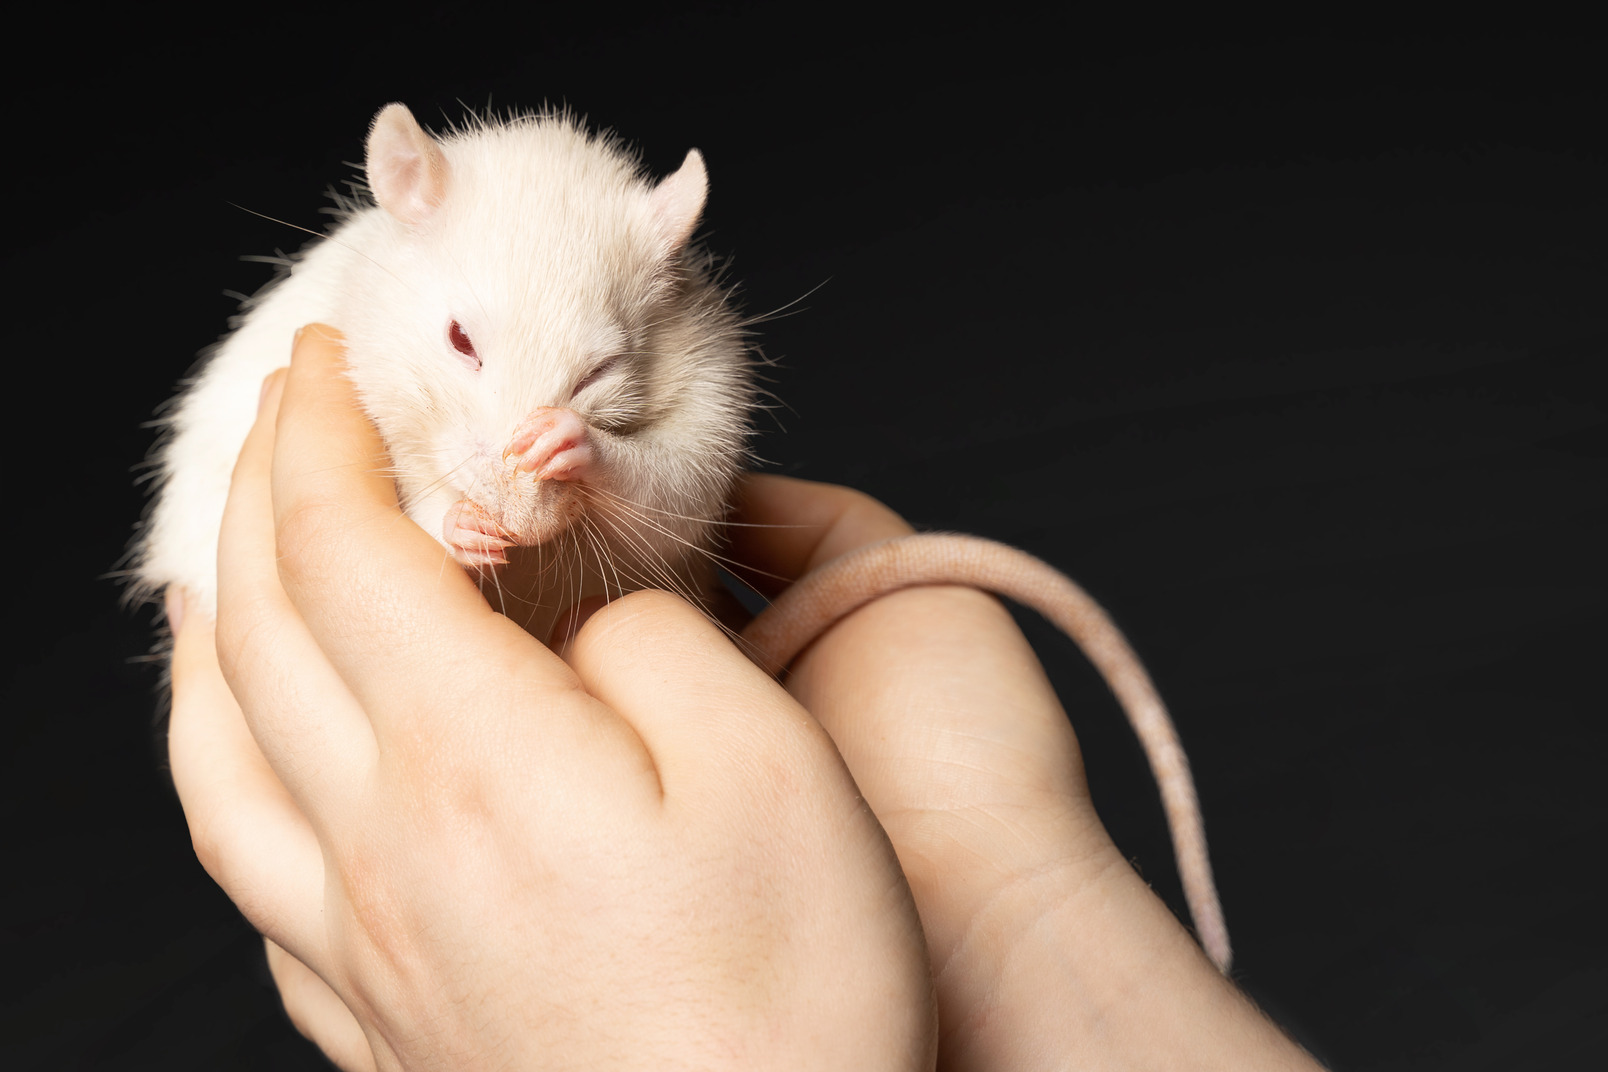 Cute white mouse rubbing nose sitting in human hands